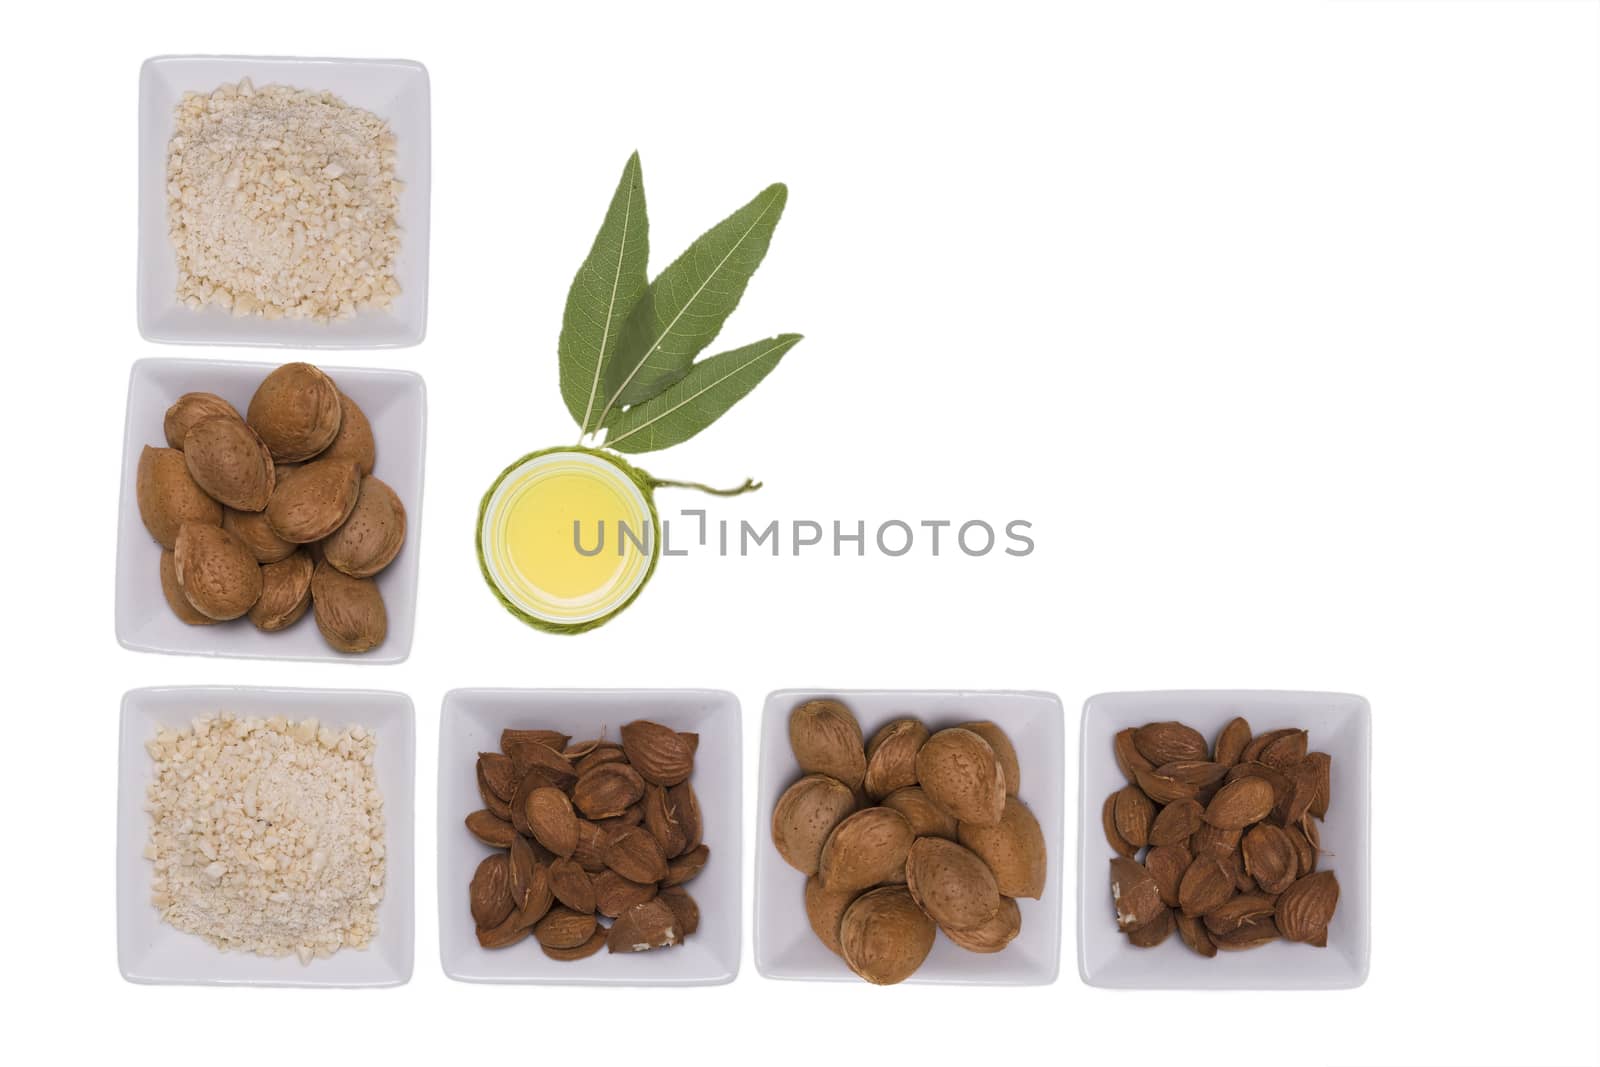 Almonds over white background. by osmar01